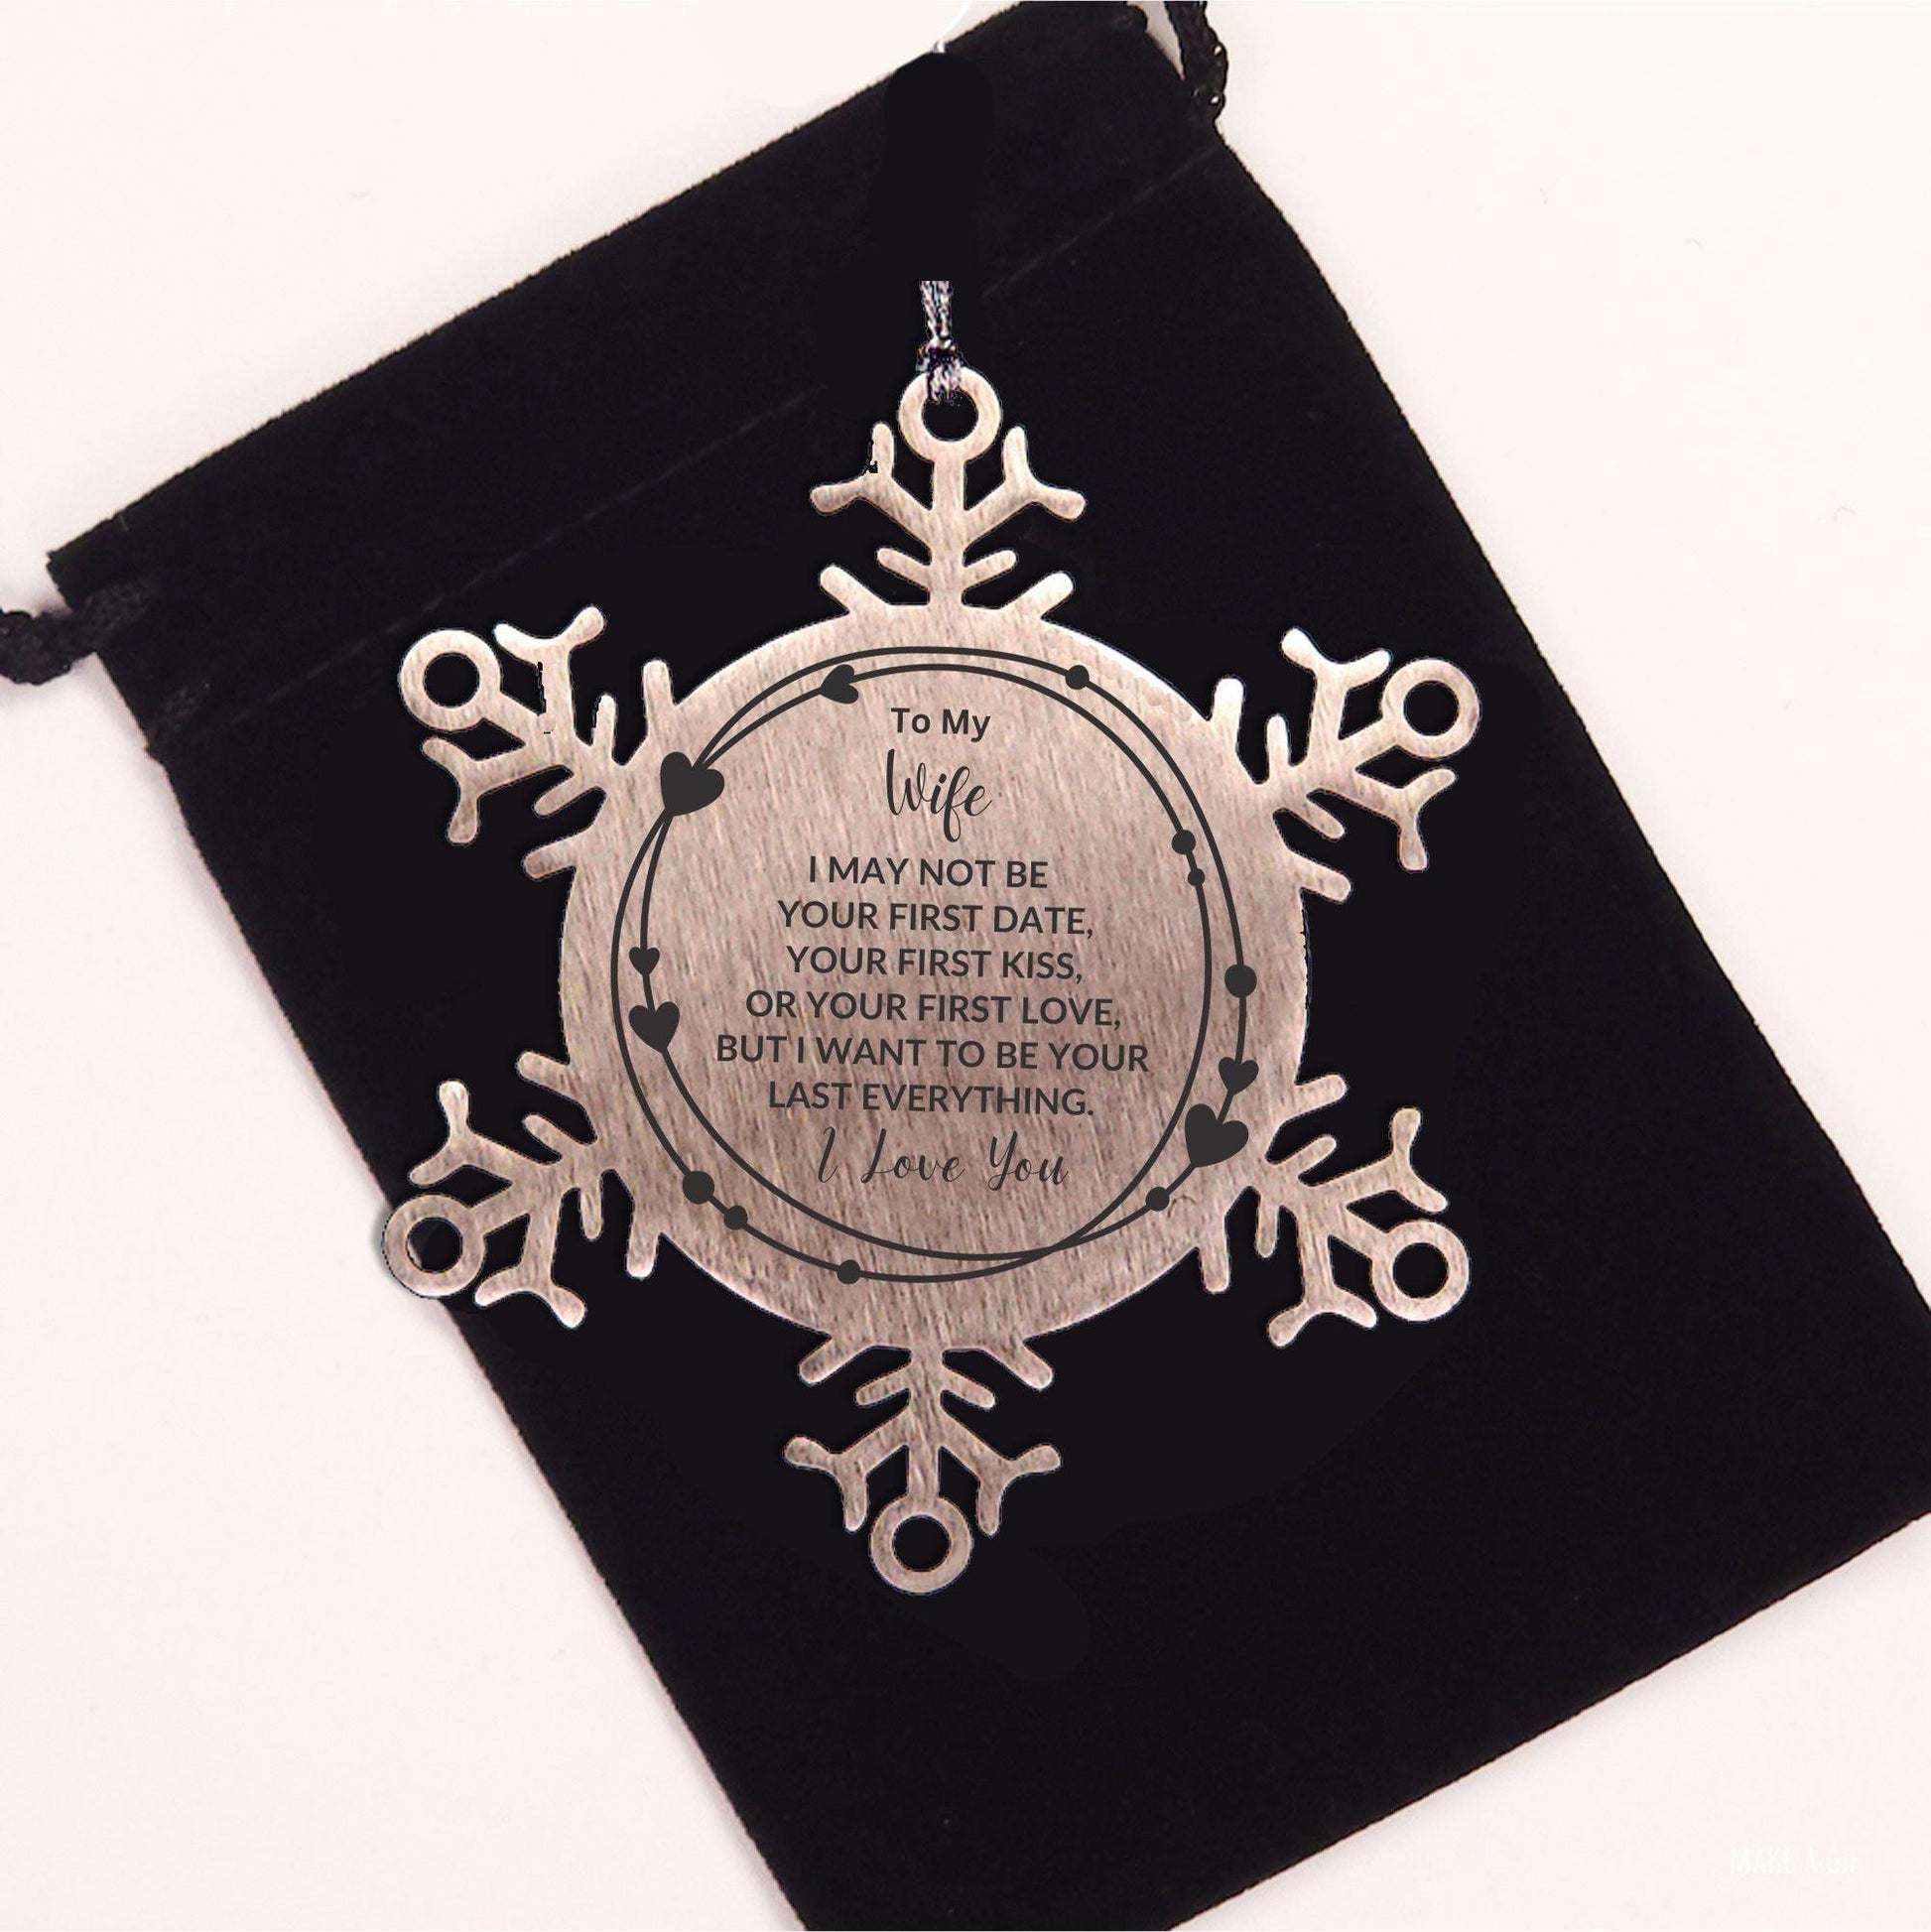 To My Wife I Want to Be Your Last Everything Snowflake Engraved Ornament Romantic Valentine Gift - Mallard Moon Gift Shop